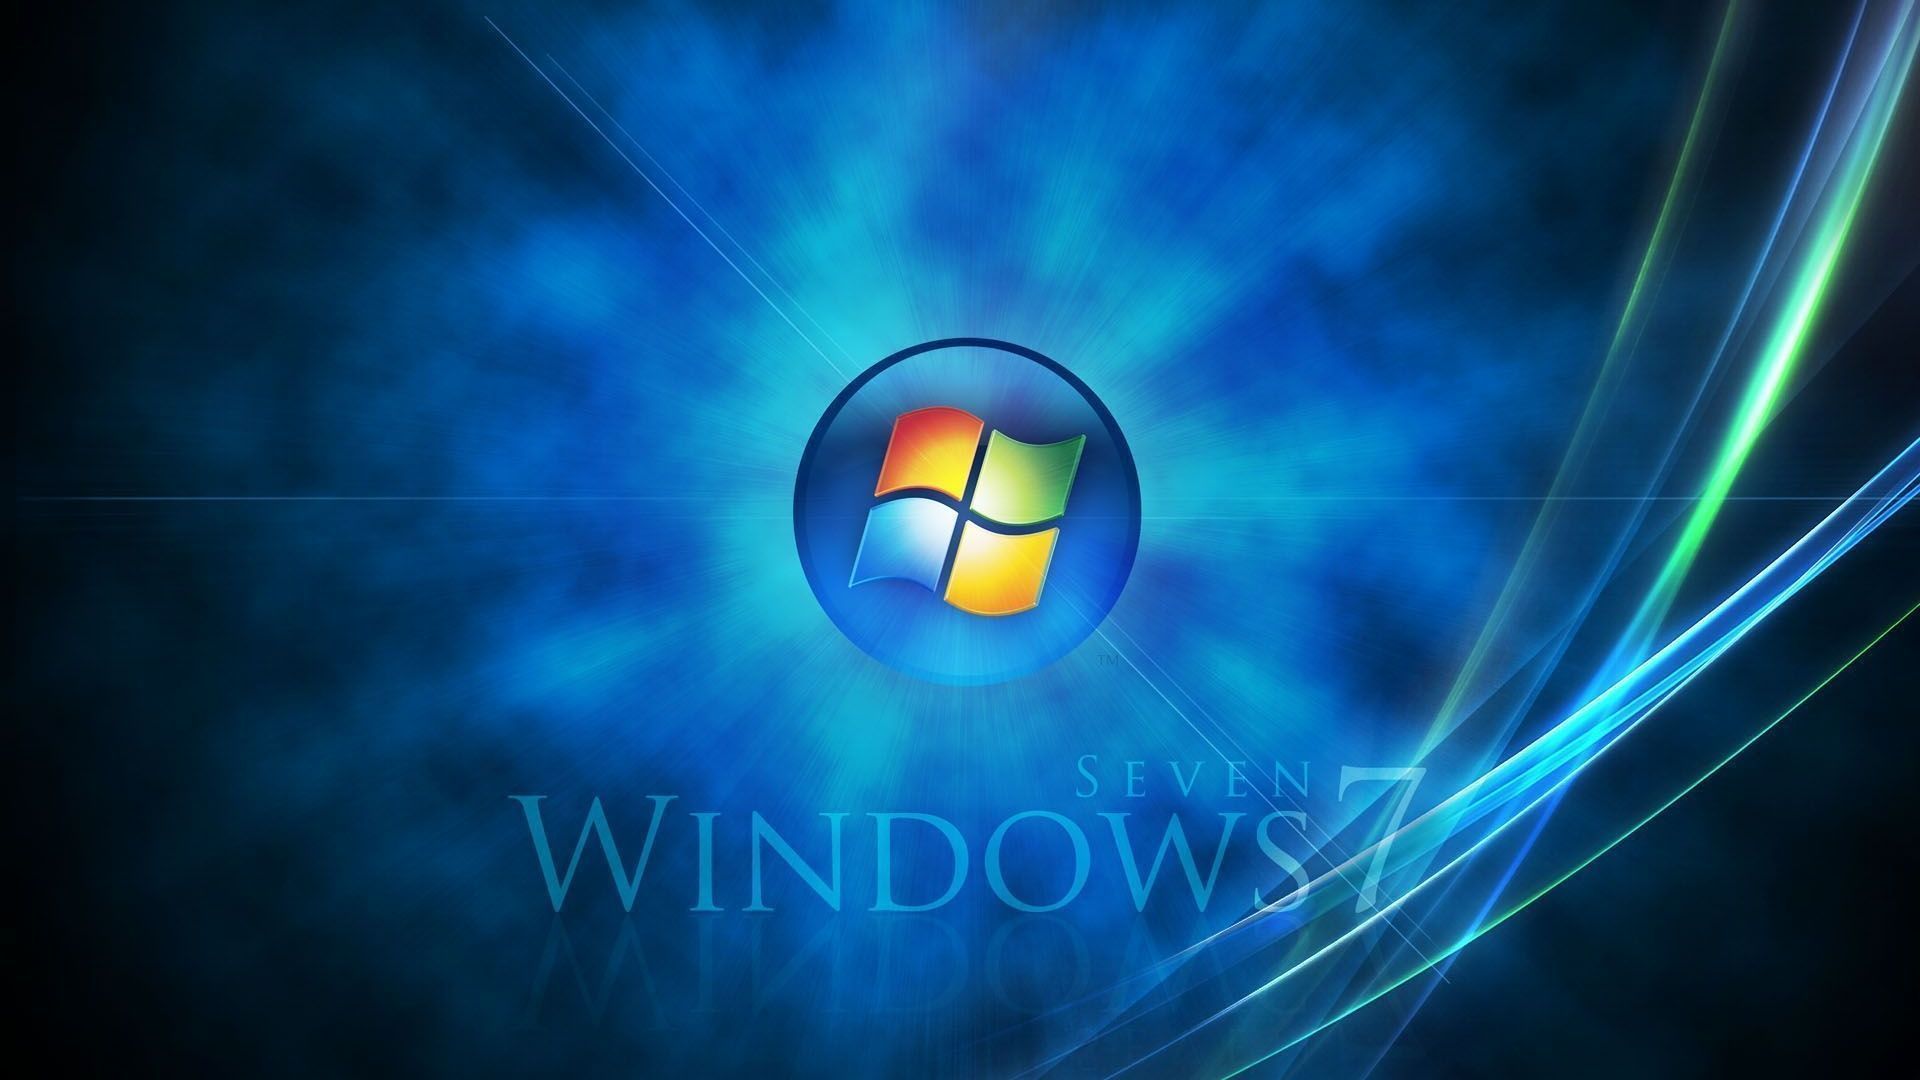 HD Windows 7 Wallpapers 1080p Group (73+)